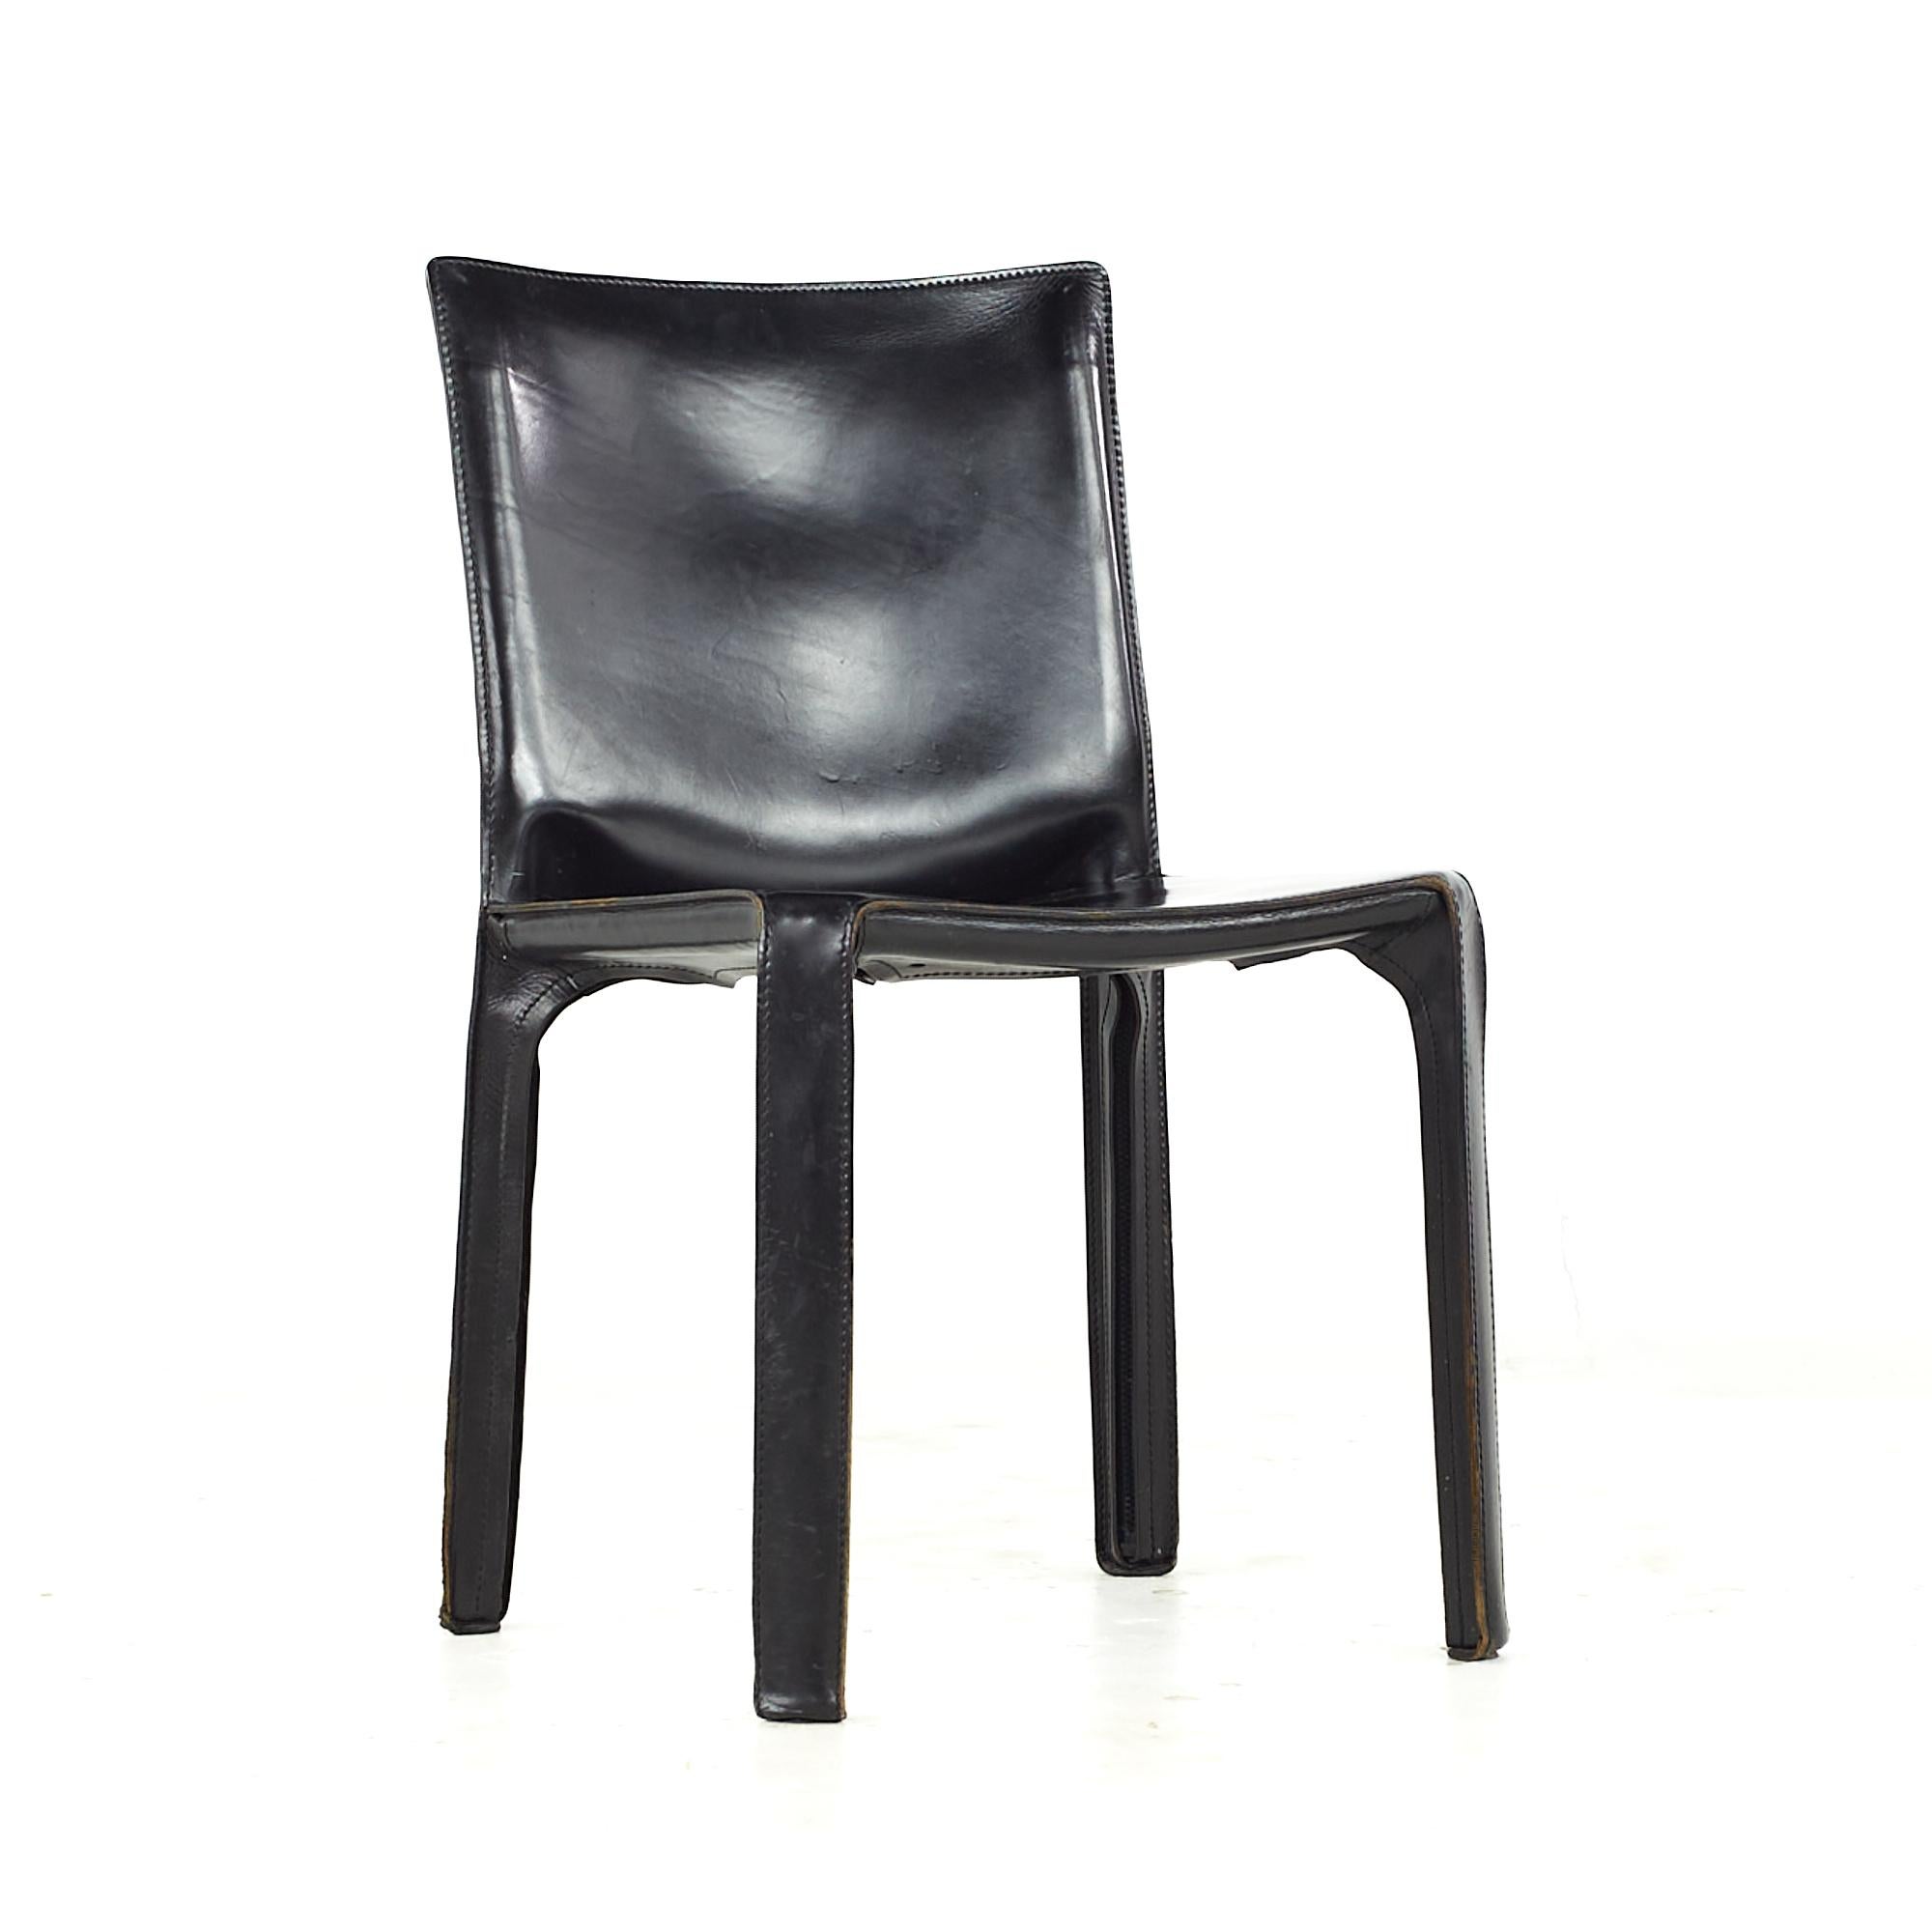 Italian Mario Bellini for Cassina Midcentury Cab Side Chairs, Set of 4 For Sale